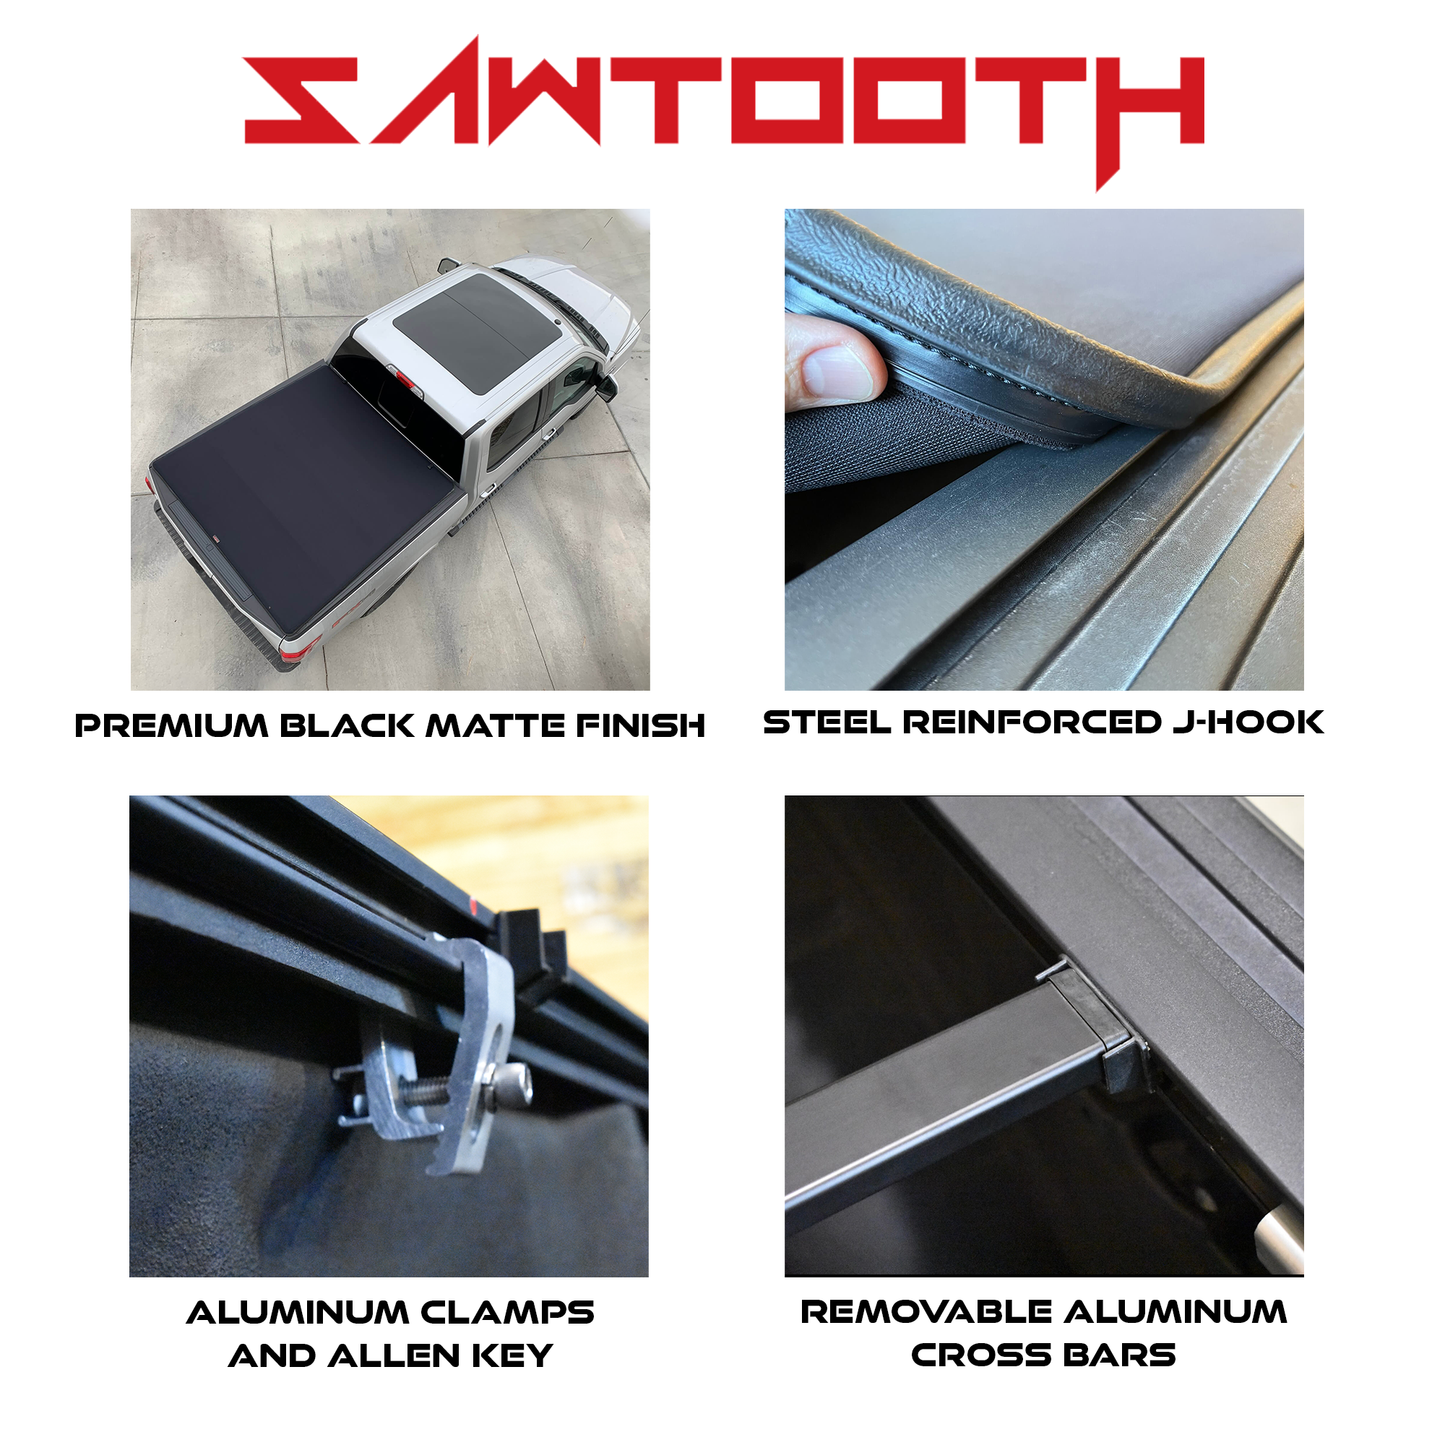 Sawtooth truck bed cover components